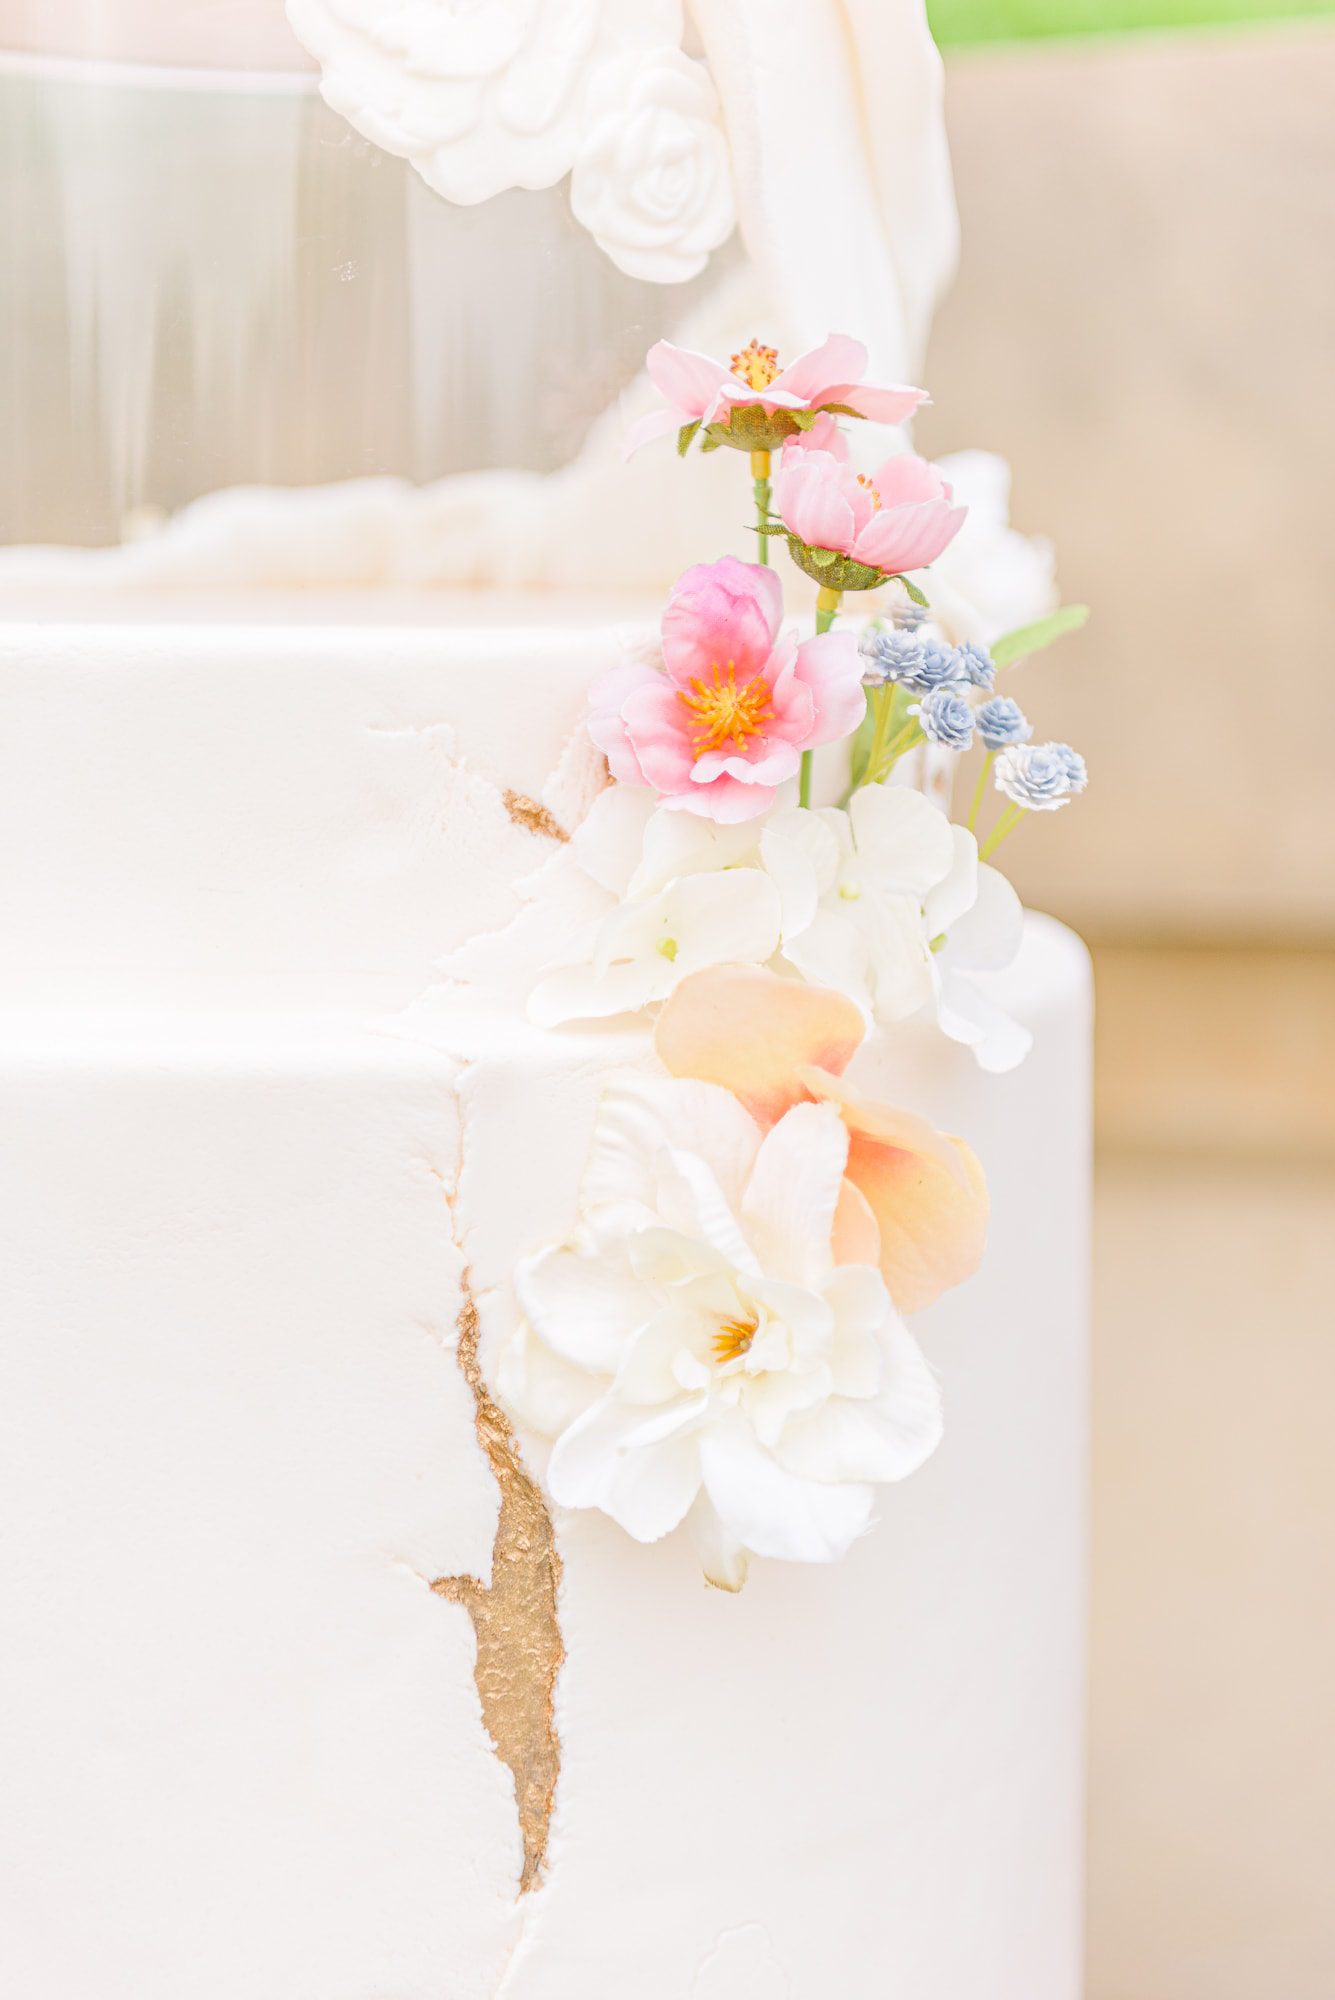 Closeup of a wedding cake decorated with summer colors and edible flowers.